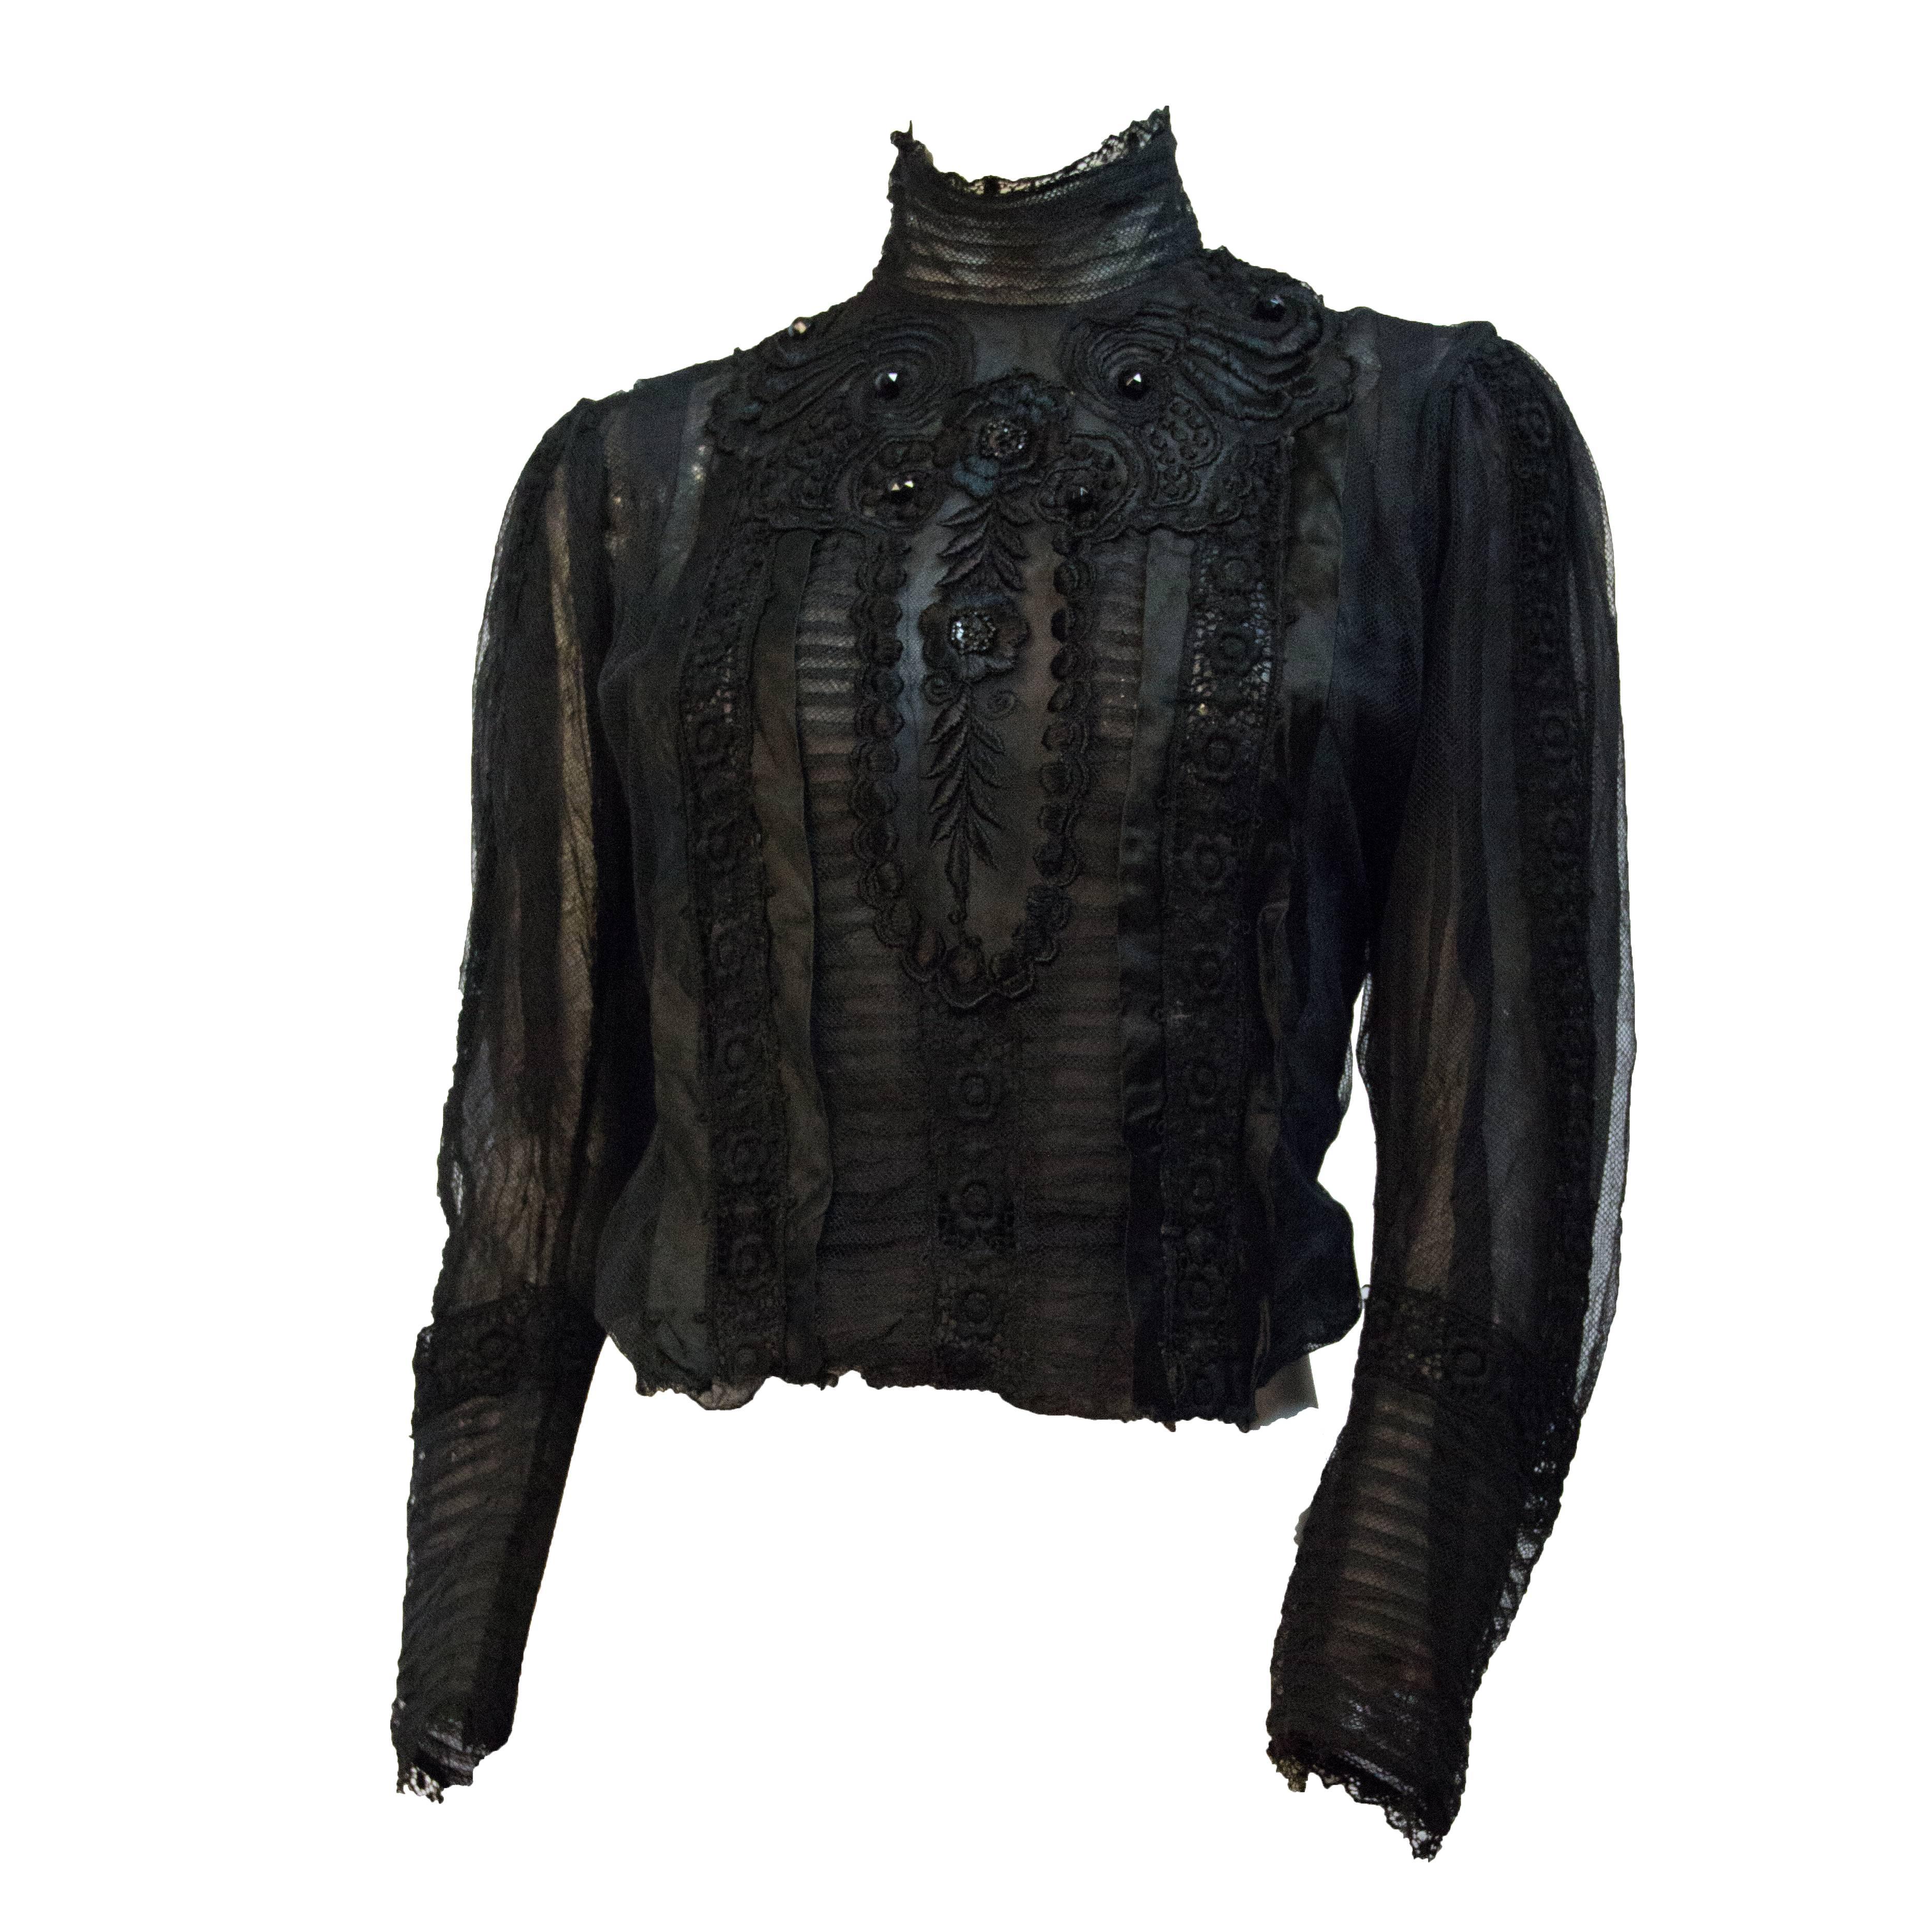 Edwardian Black Mesh Embroidered Blouse with Black Silk Embroidery and Jet Beads